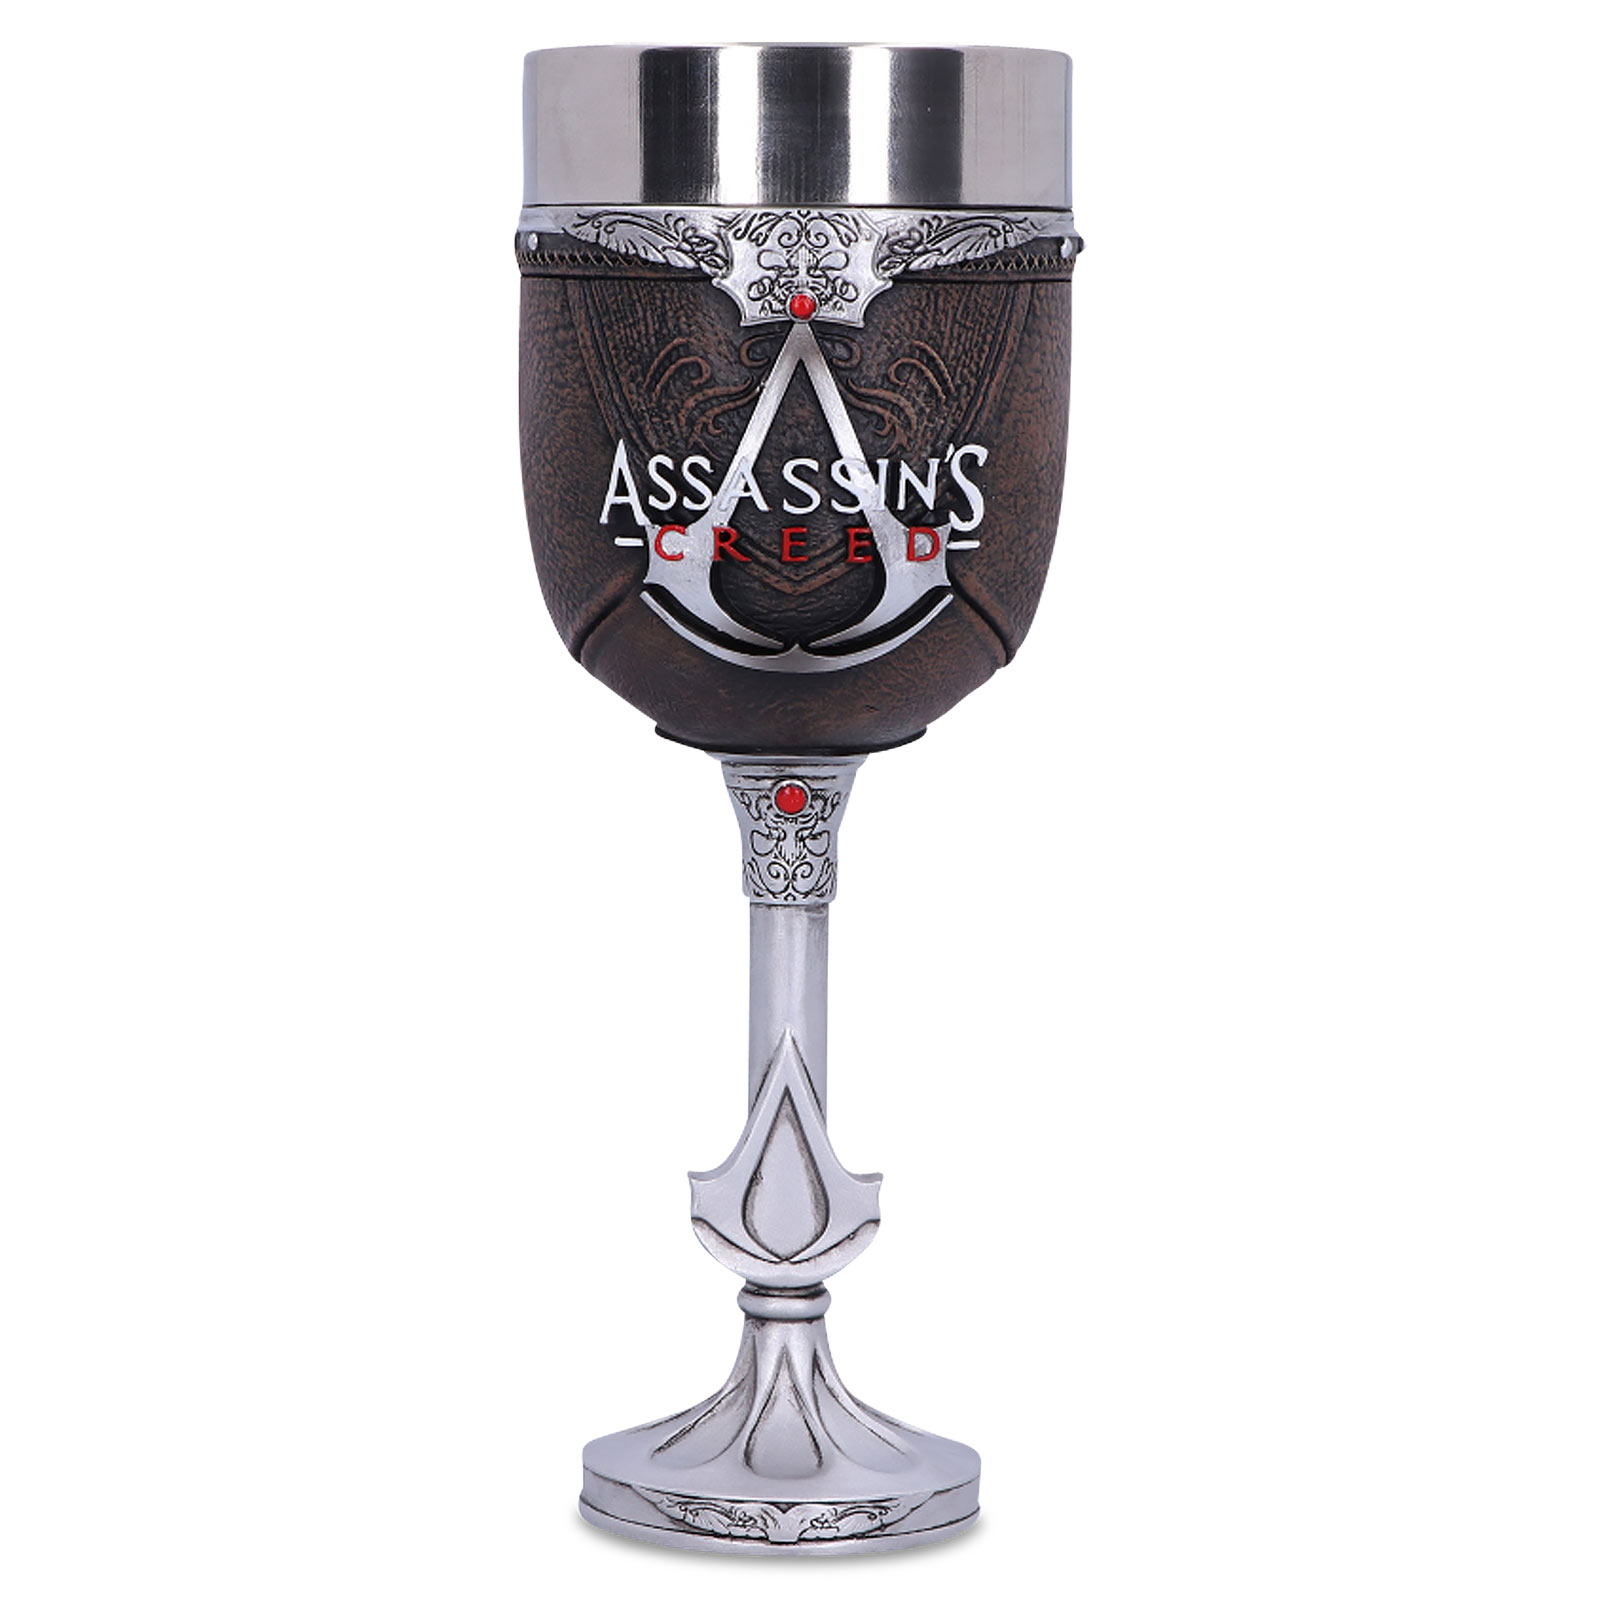 Assassin's Creed - Logo Kelch deluxe braun